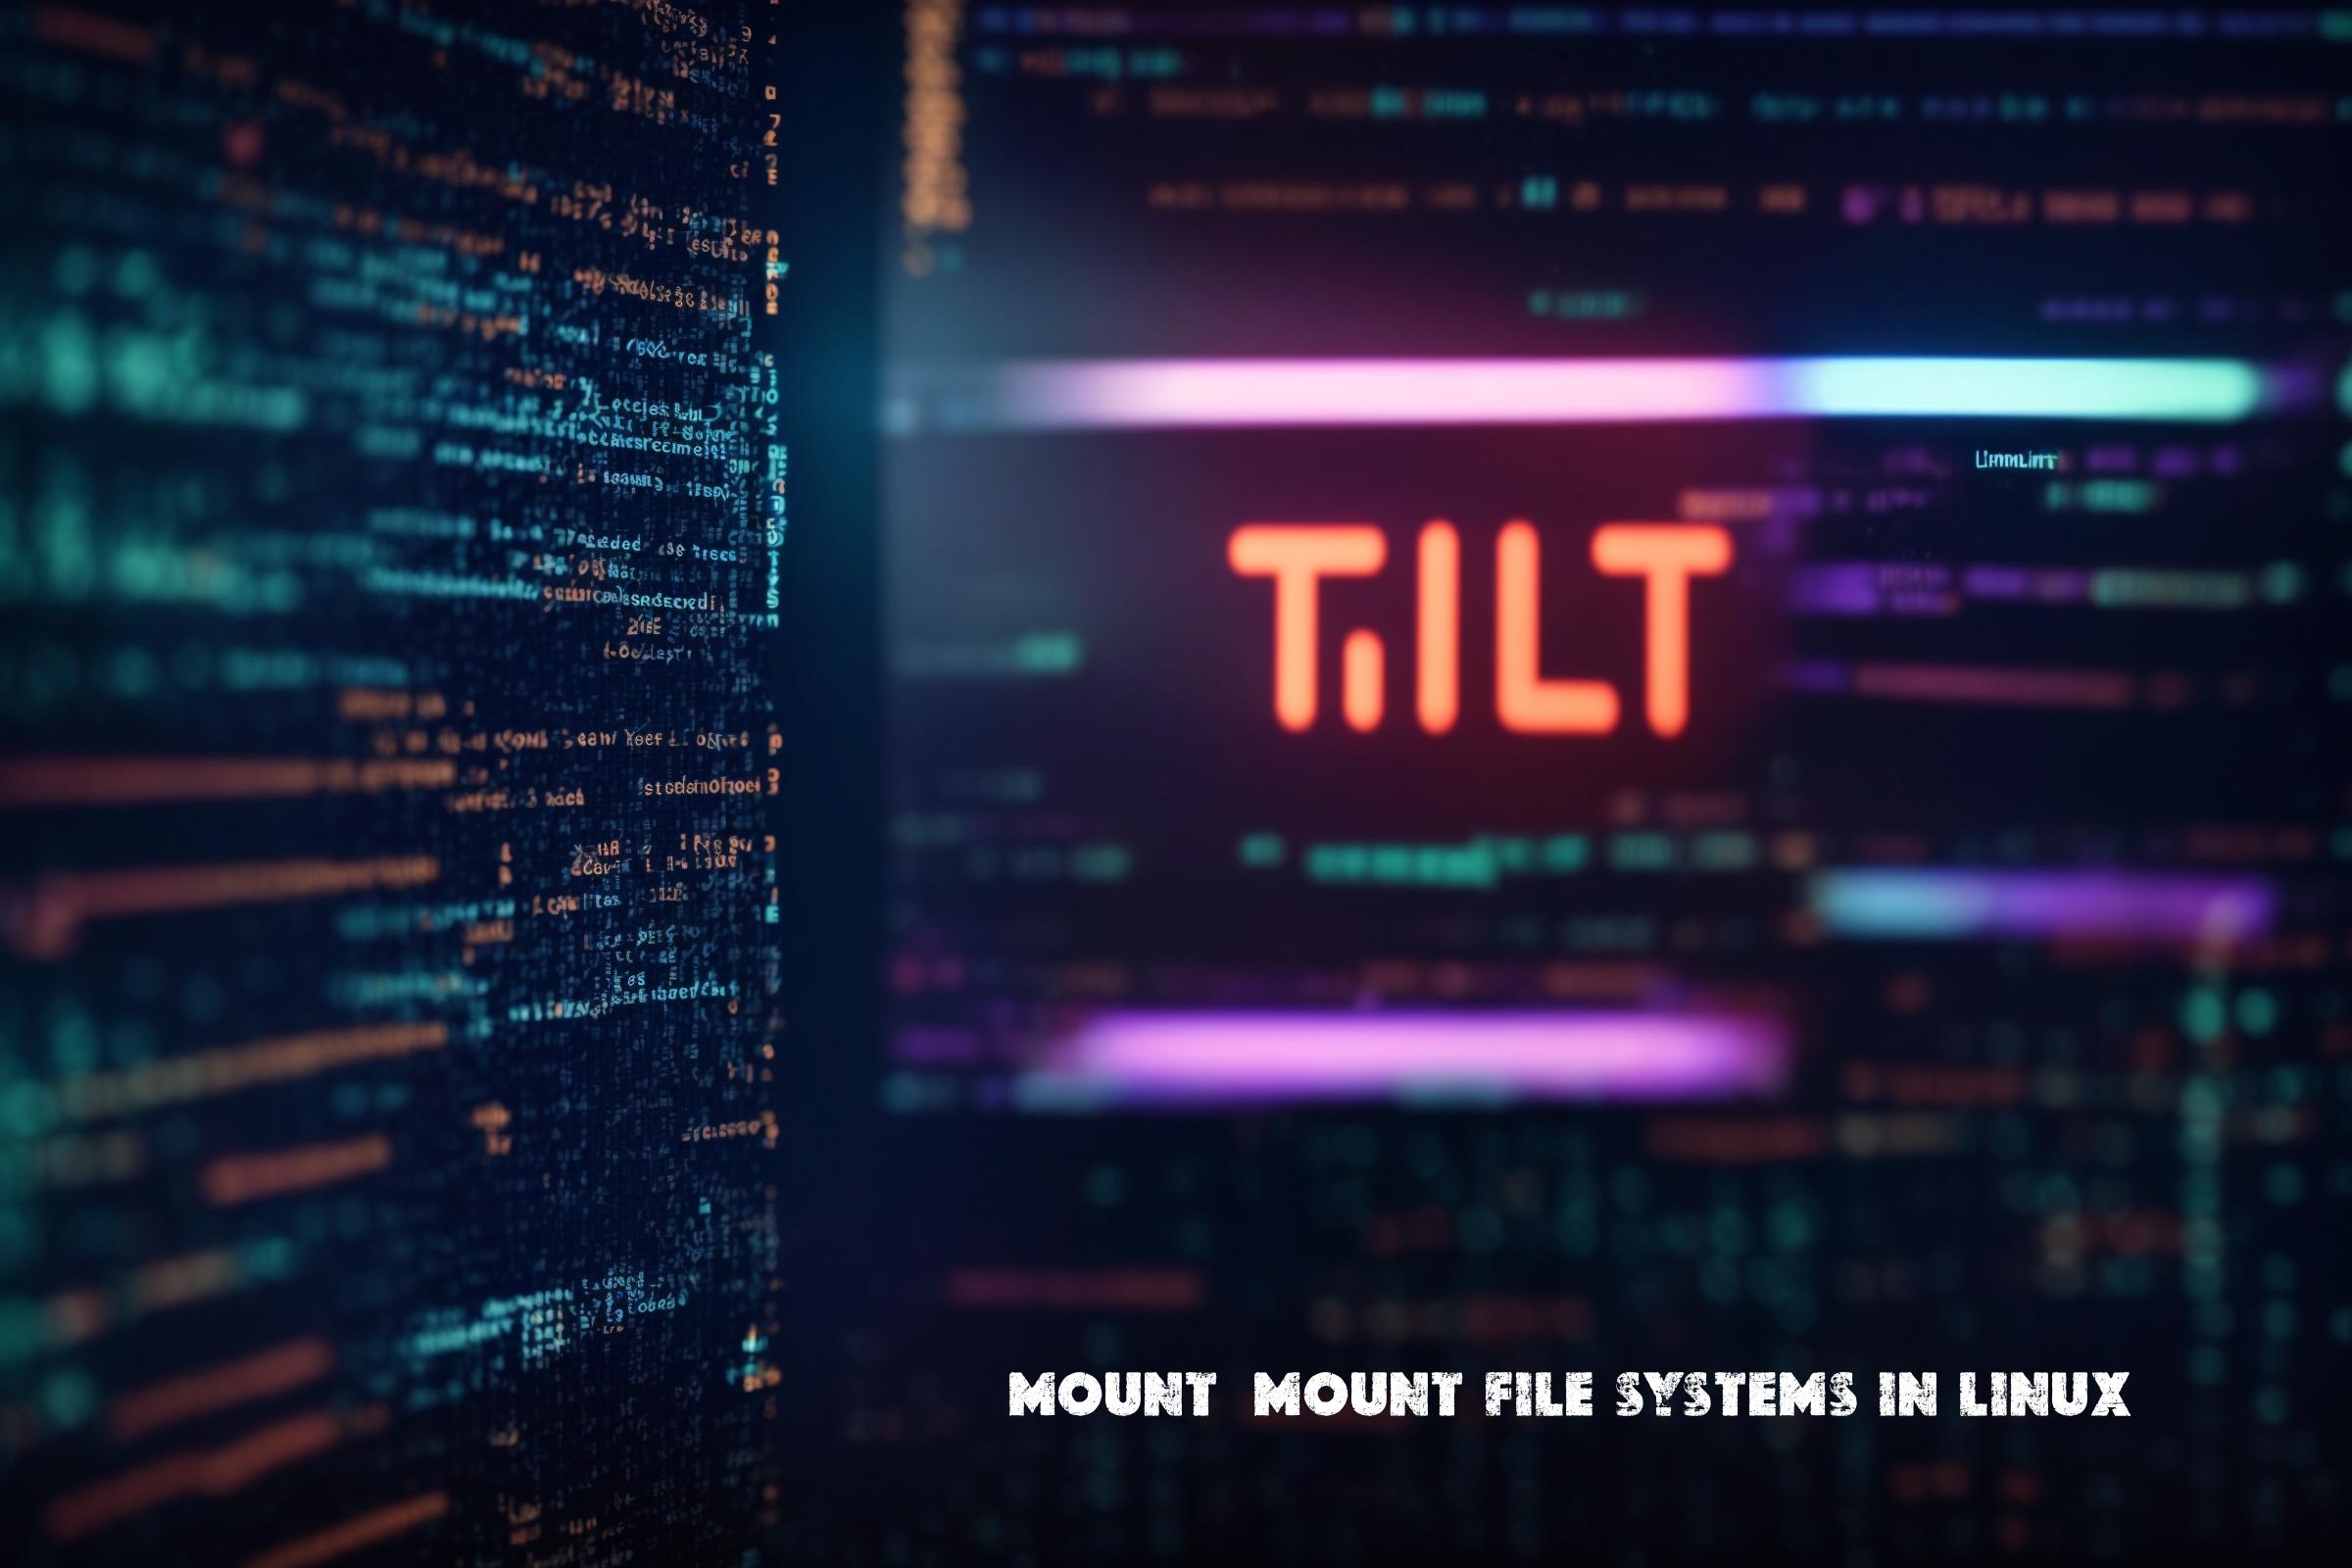 Usage of mount – Mount file systems in Linux